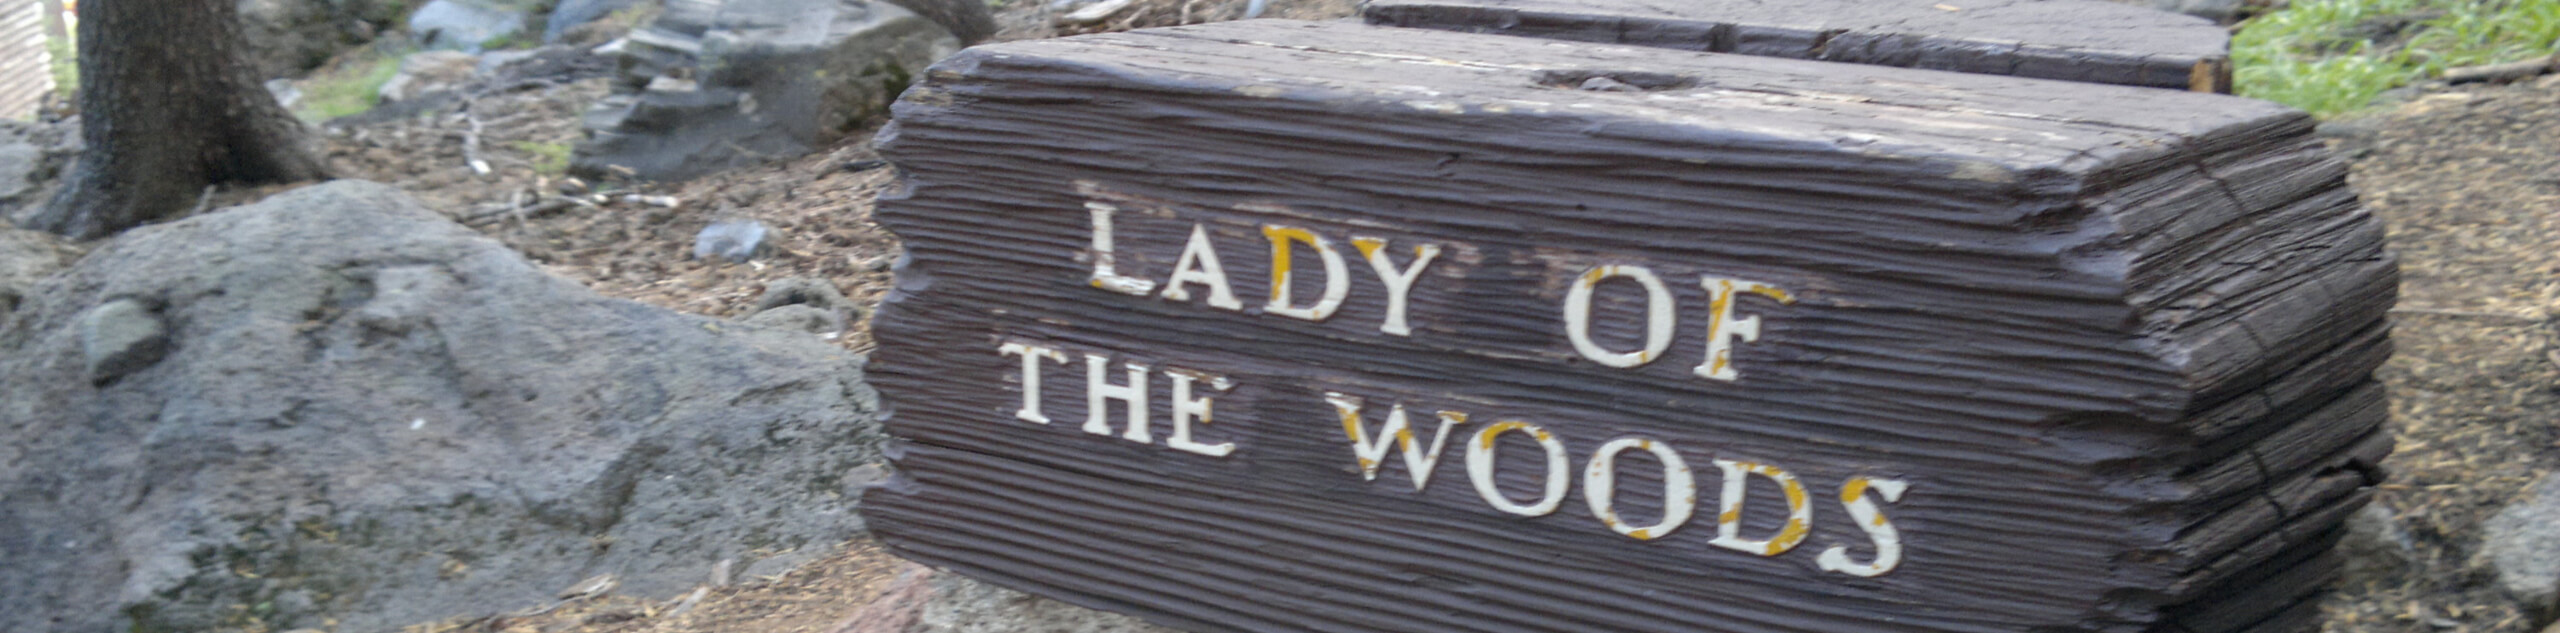 Lady of the Woods Trail